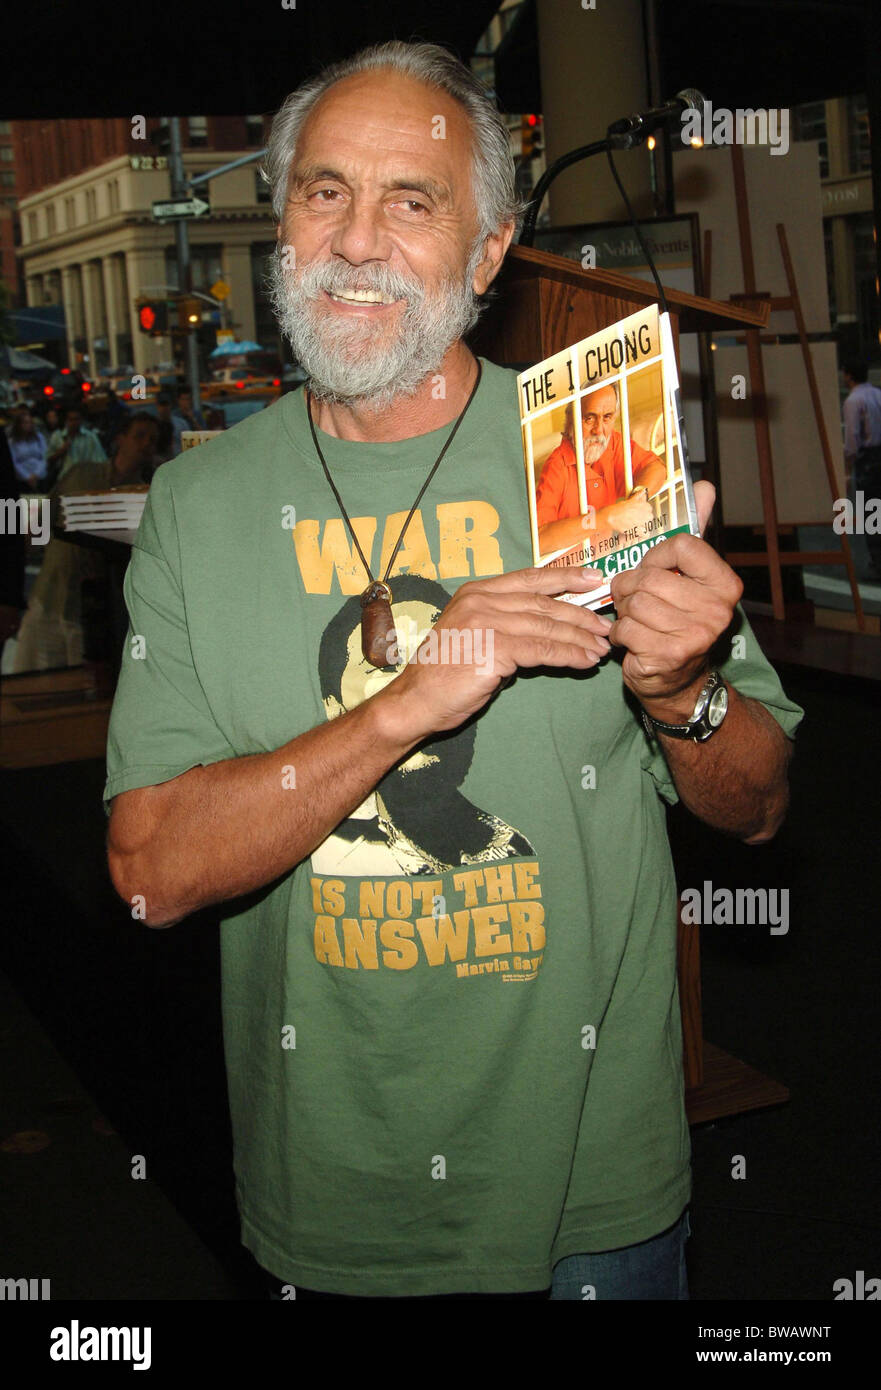 Book signing by Tommy Chong of THE I CHONG Stock Photo - Alamy